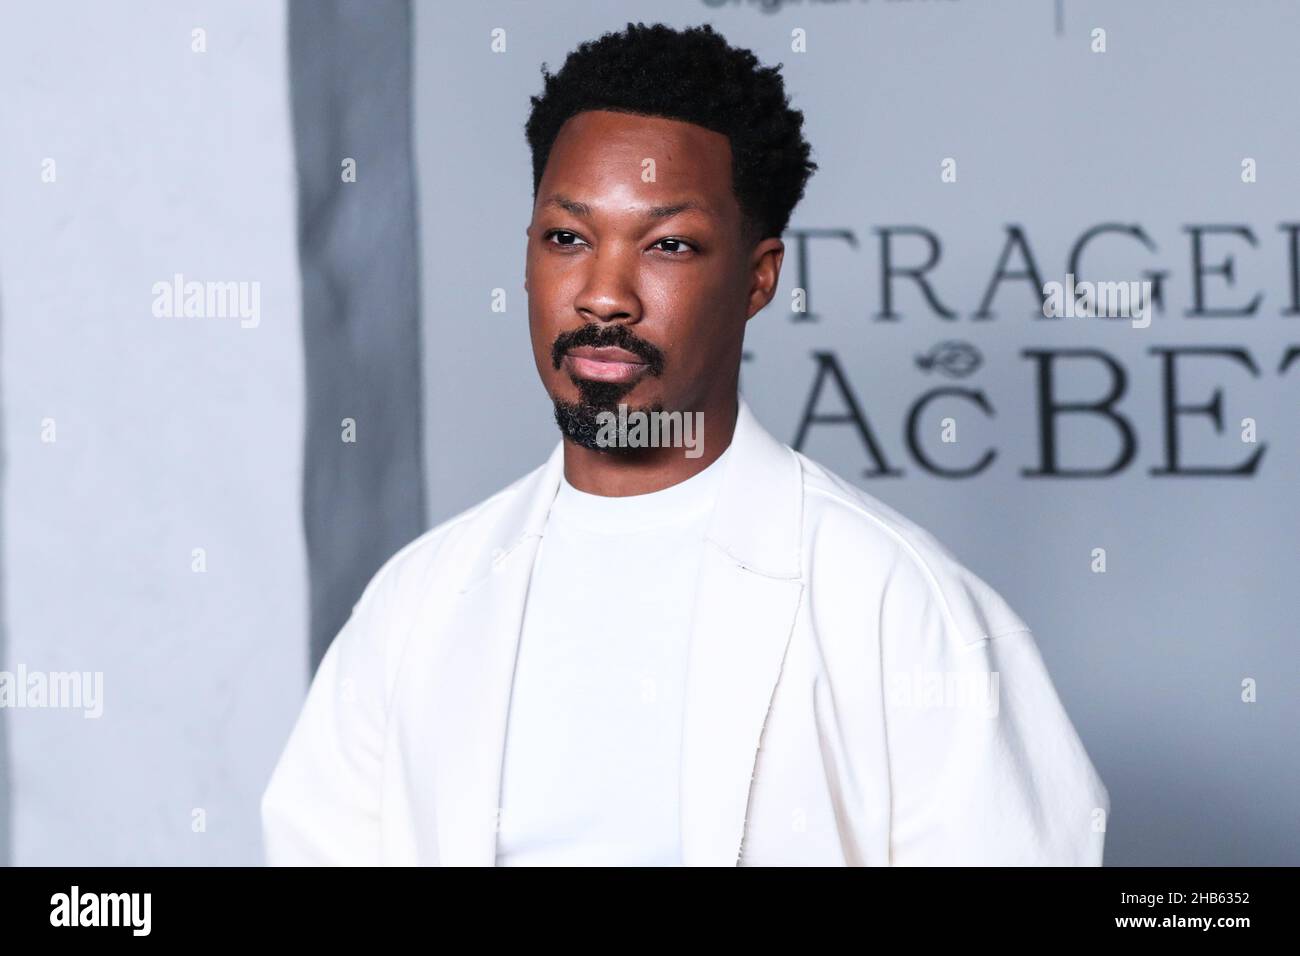 LOS ANGELES, CALIFORNIA, USA - DECEMBER 16: American actor Corey Hawkins arrives at the Los Angeles Premiere Of Apple Original Films' and A24's 'The Tragedy Of Macbeth' held at the Directors Guild of America Theater Complex on December 16, 2021 in Los Angeles, California, USA. (Photo by Xavier Collin/Image Press Agency) Stock Photo